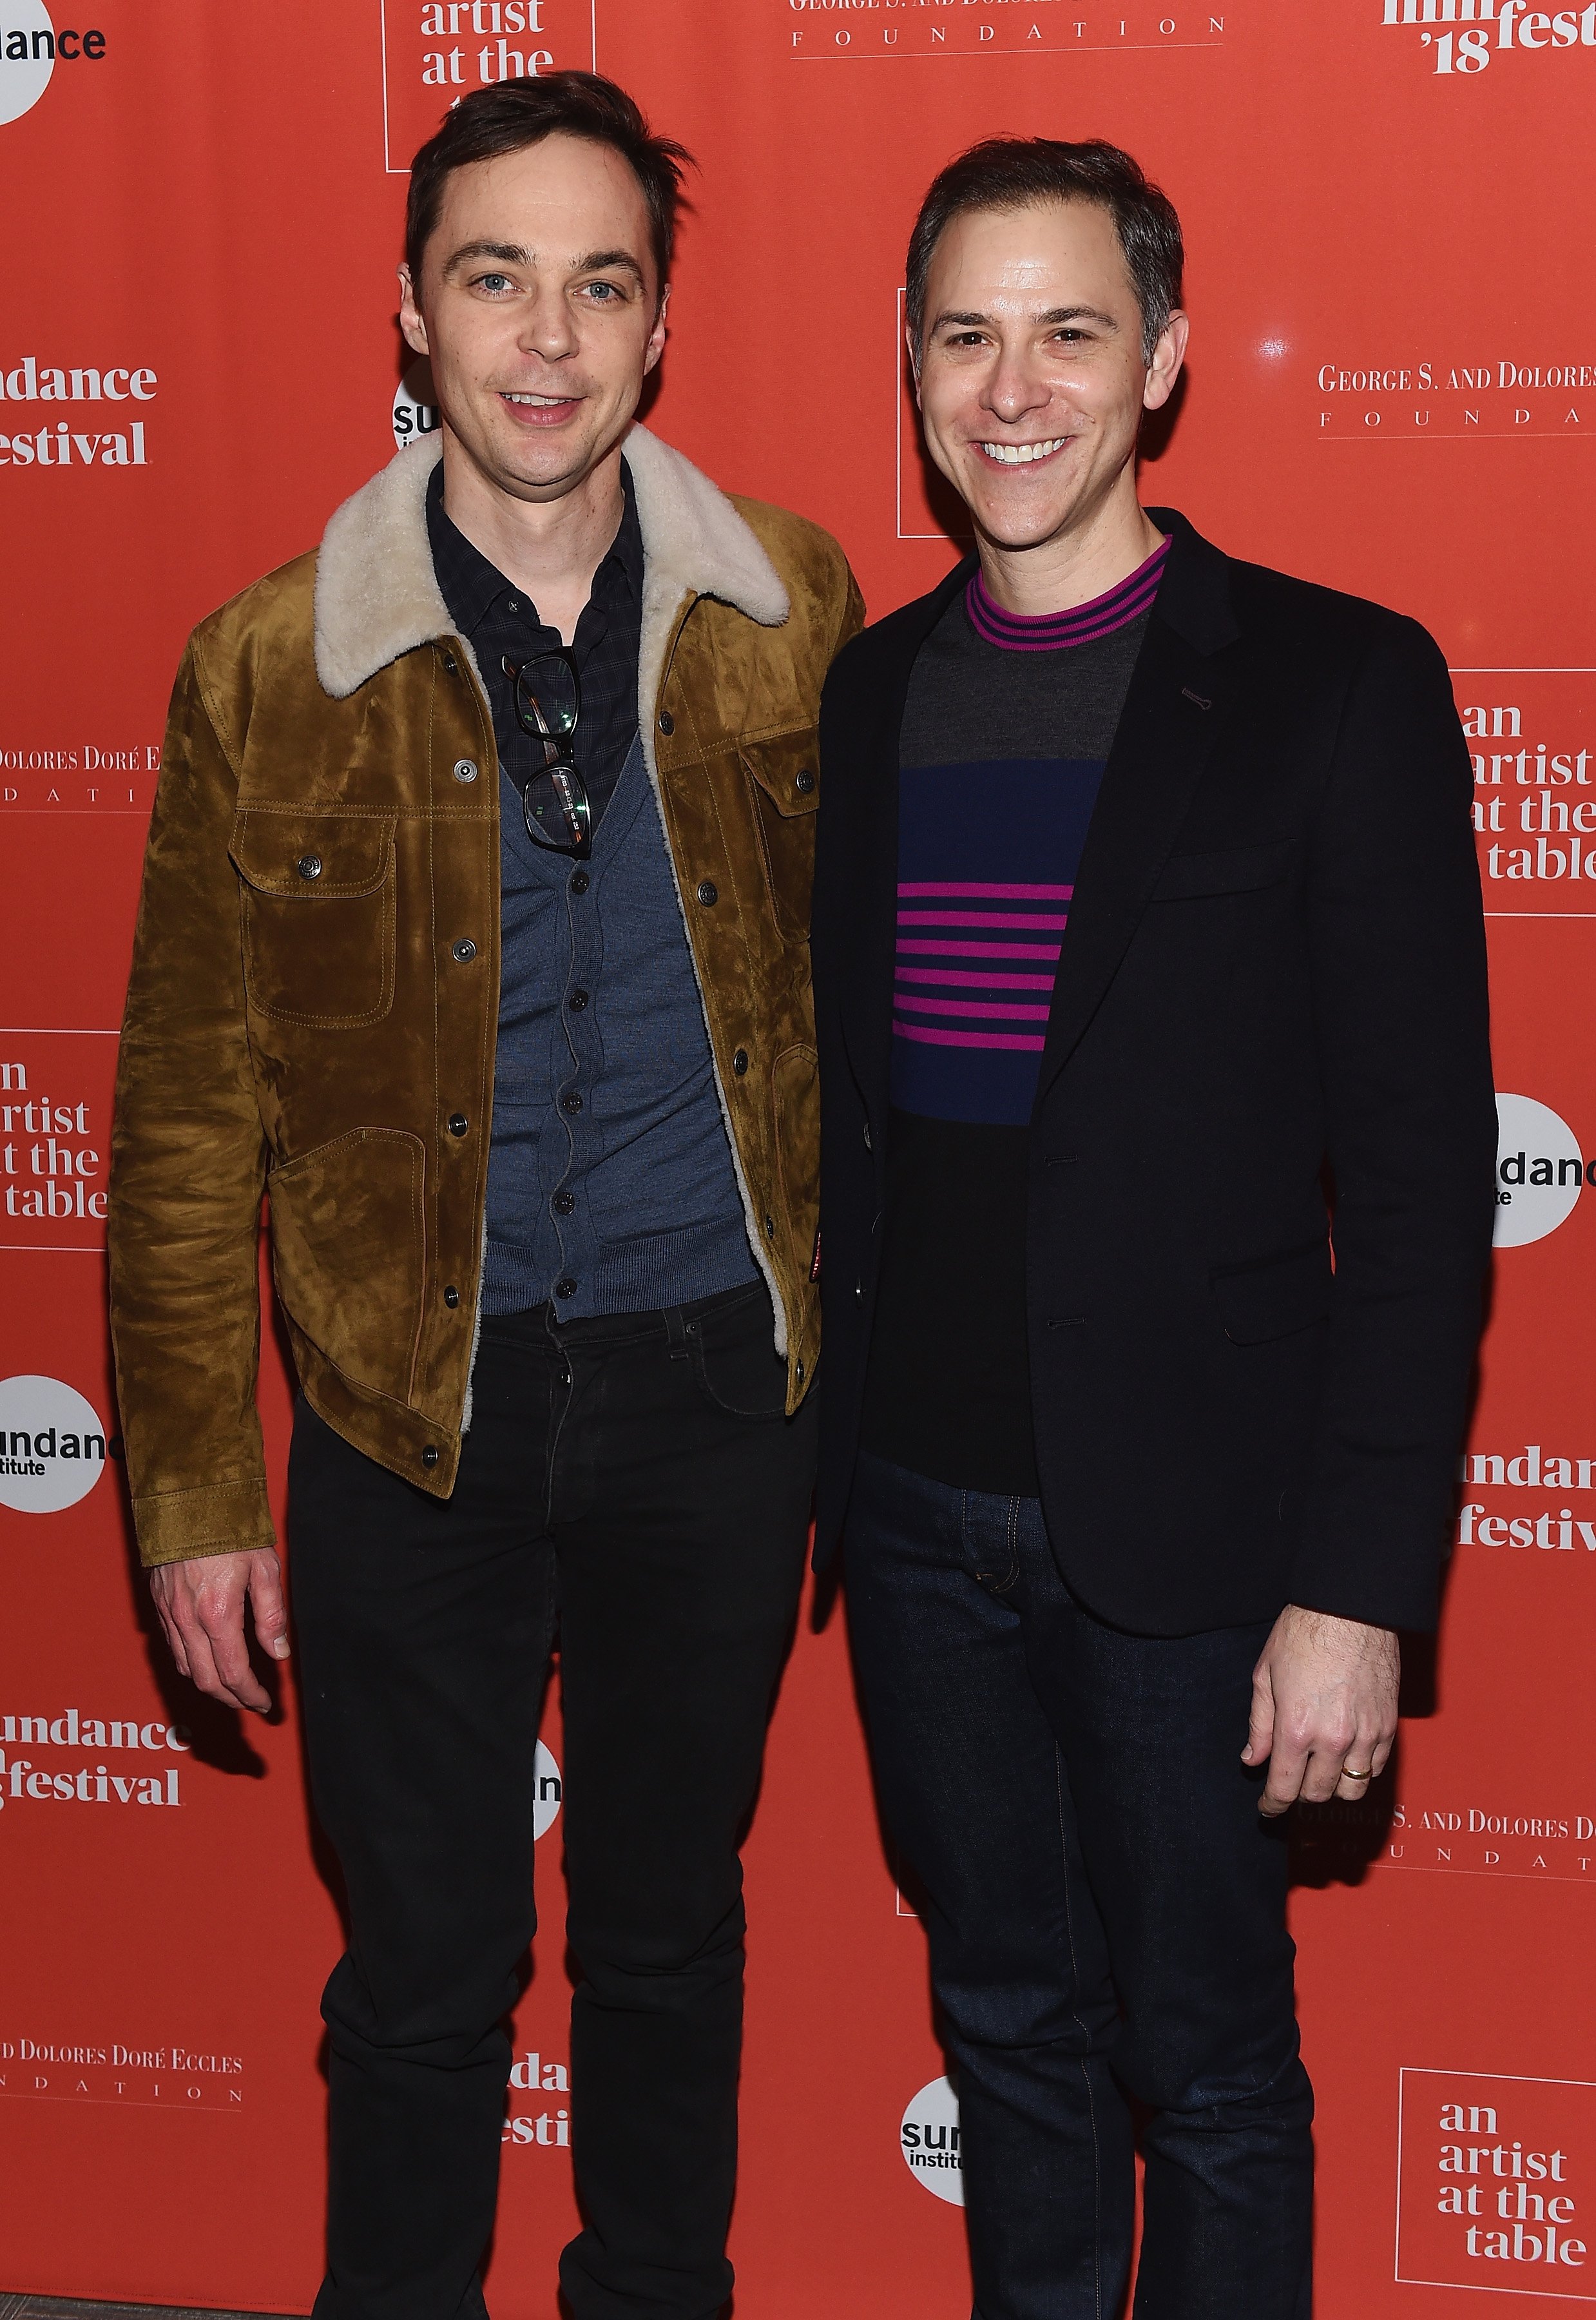 Actor Jim Parsons and Todd Spiewak at DeJoria Center on January 18, 2018 in Park City, Utah. | Source: Getty Images